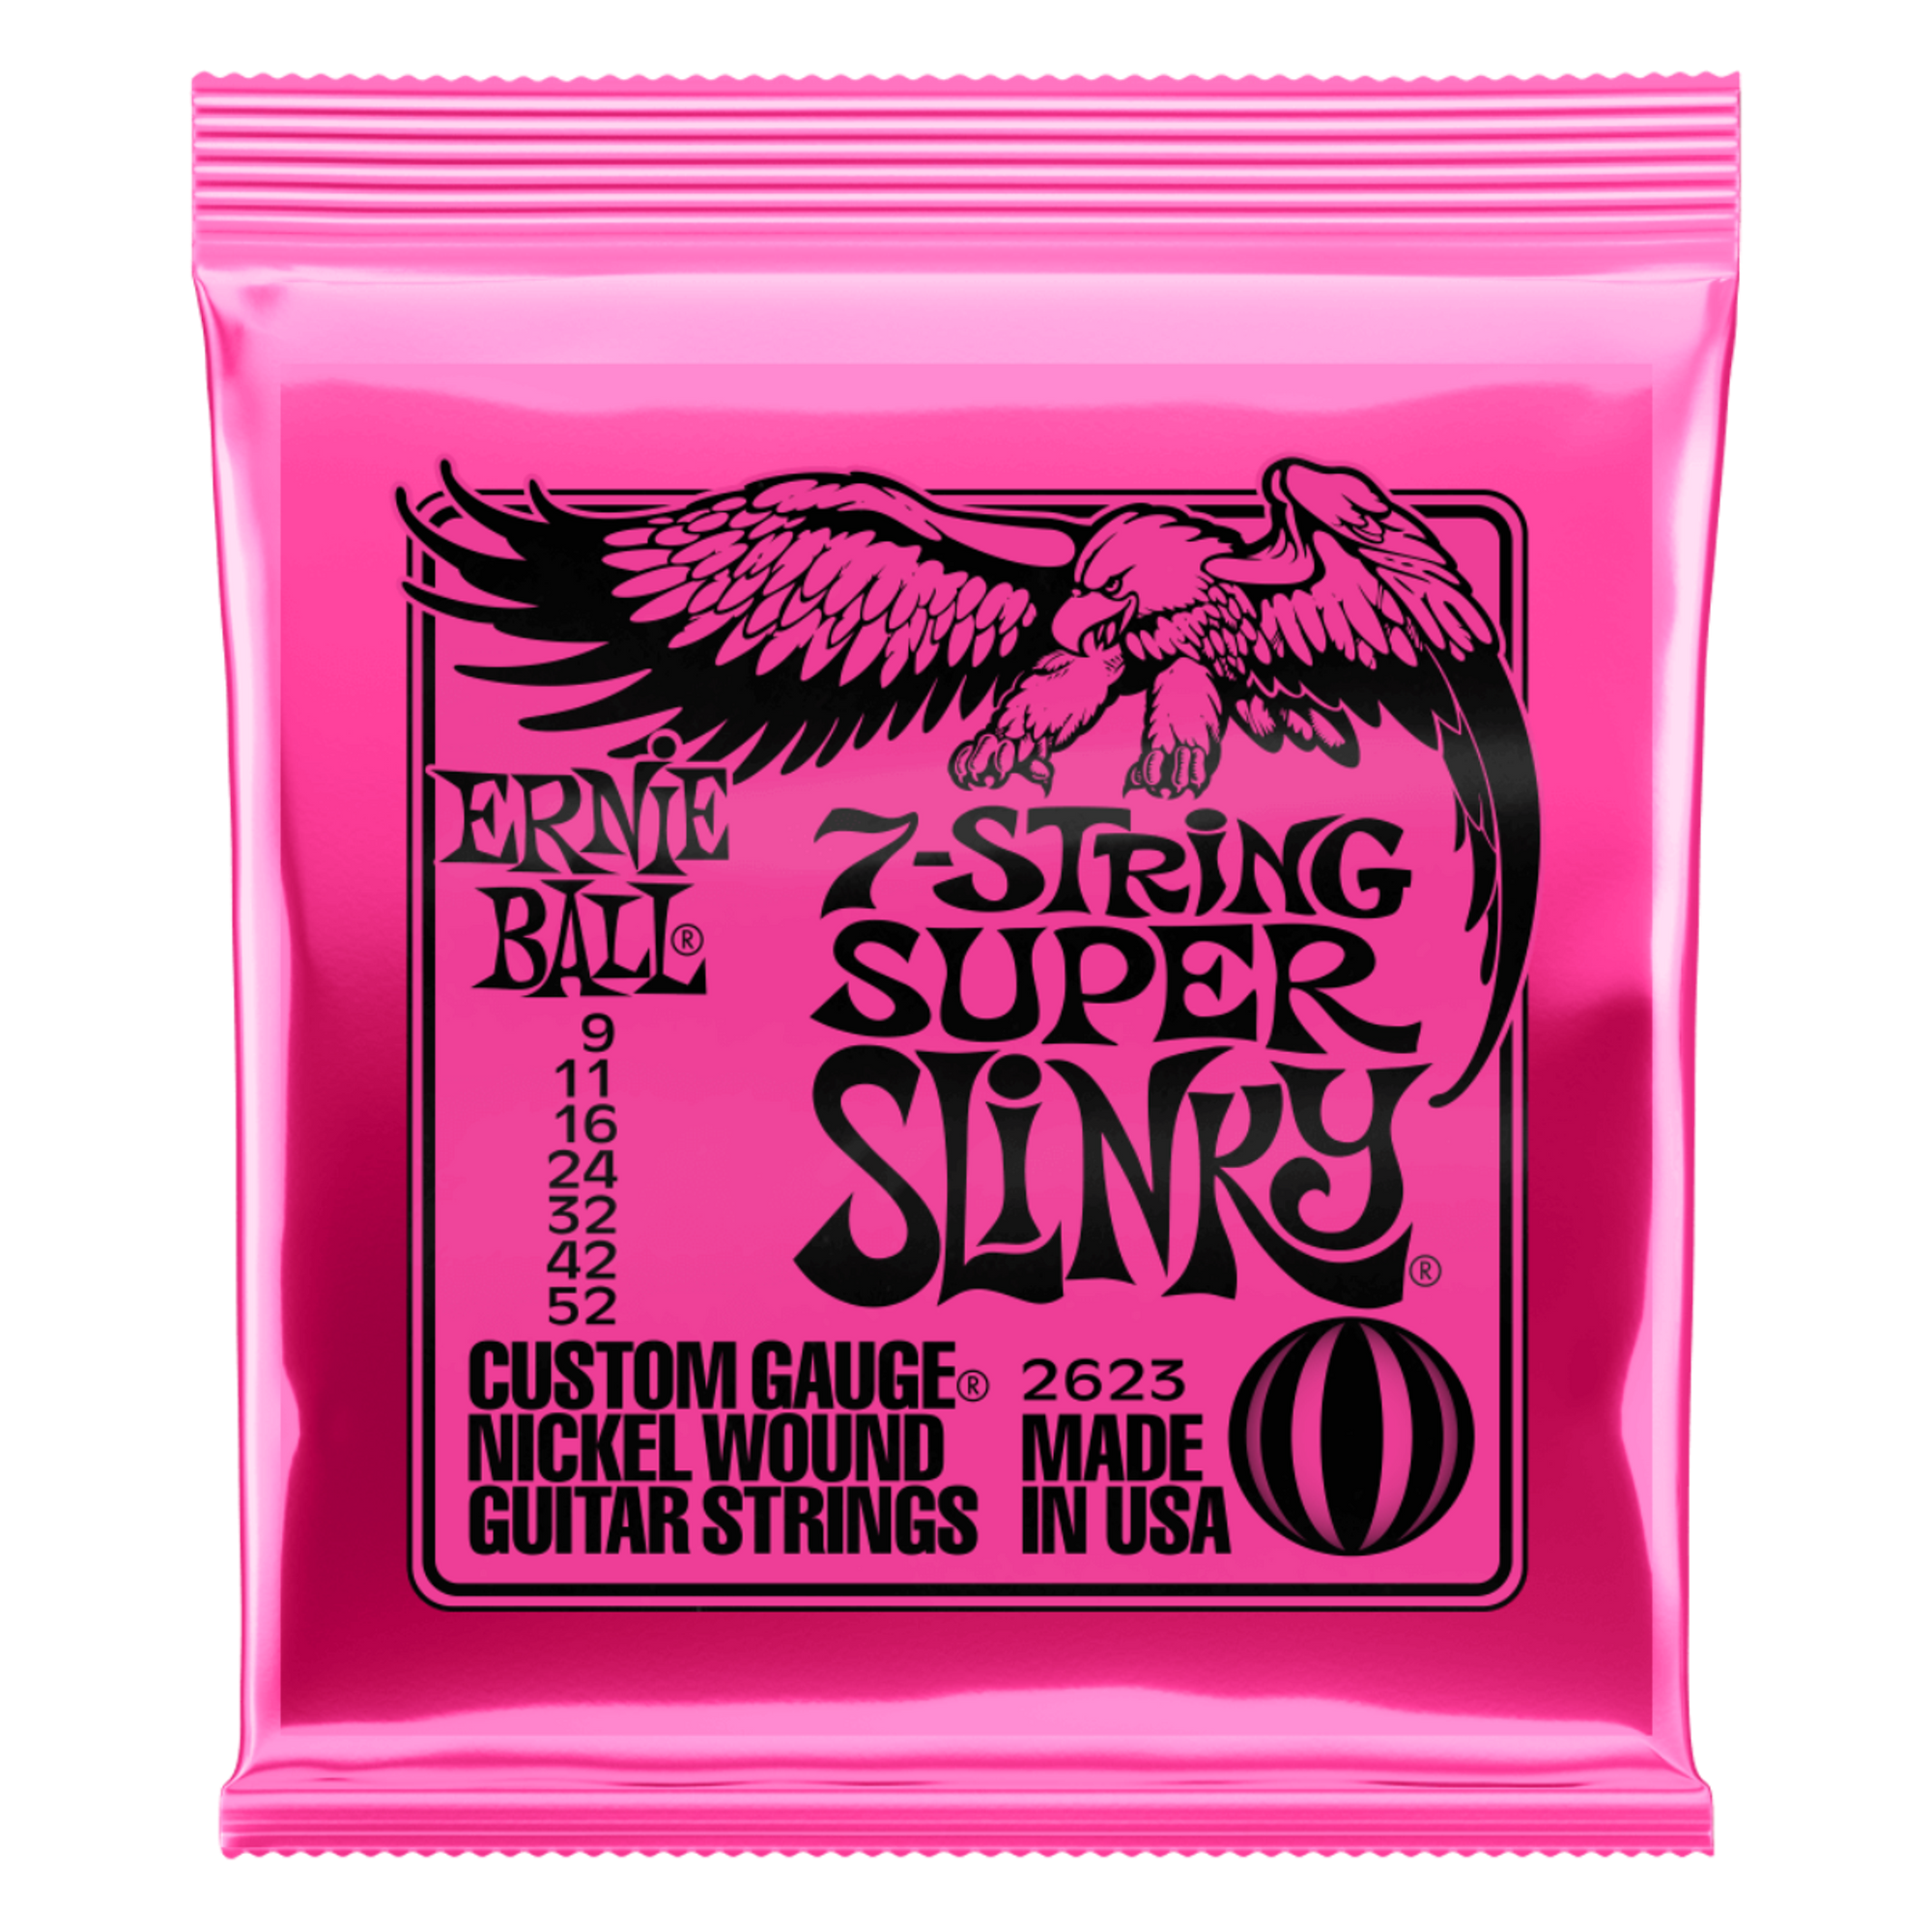 Ernie Ball Nickel Wound Electric Guitar Strings are made from nickel plated steel wire wrapped around tin plated hex shaped steel core wire. The plain strings are made of specially tempered tin plated high carbon steel producing a well balanced tone for your guitar.